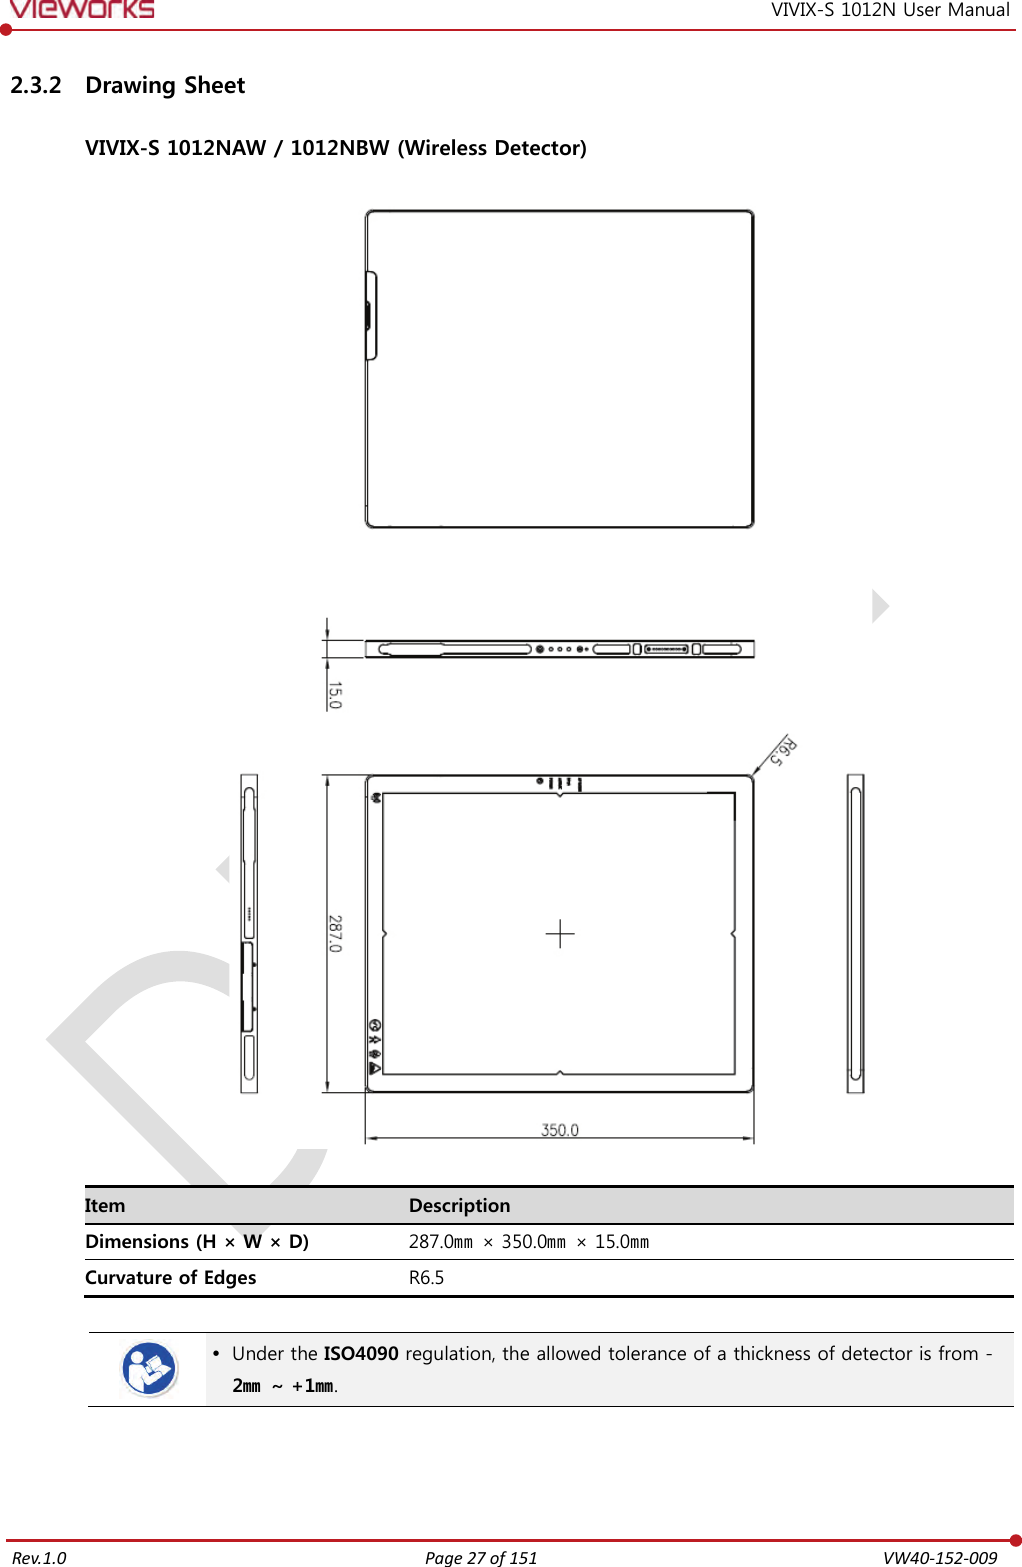   Rev.1.0 Page 27 of 151  VW40-152-009 VIVIX-S 1012N User Manual 2.3.2 Drawing Sheet  VIVIX-S 1012NAW / 1012NBW (Wireless Detector)    Item Description Dimensions (H × W × D) 287.0㎜ × 350.0㎜ × 15.0㎜ Curvature of Edges R6.5    Under the ISO4090 regulation, the allowed tolerance of a thickness of detector is from -2㎜ ~ +1㎜.    